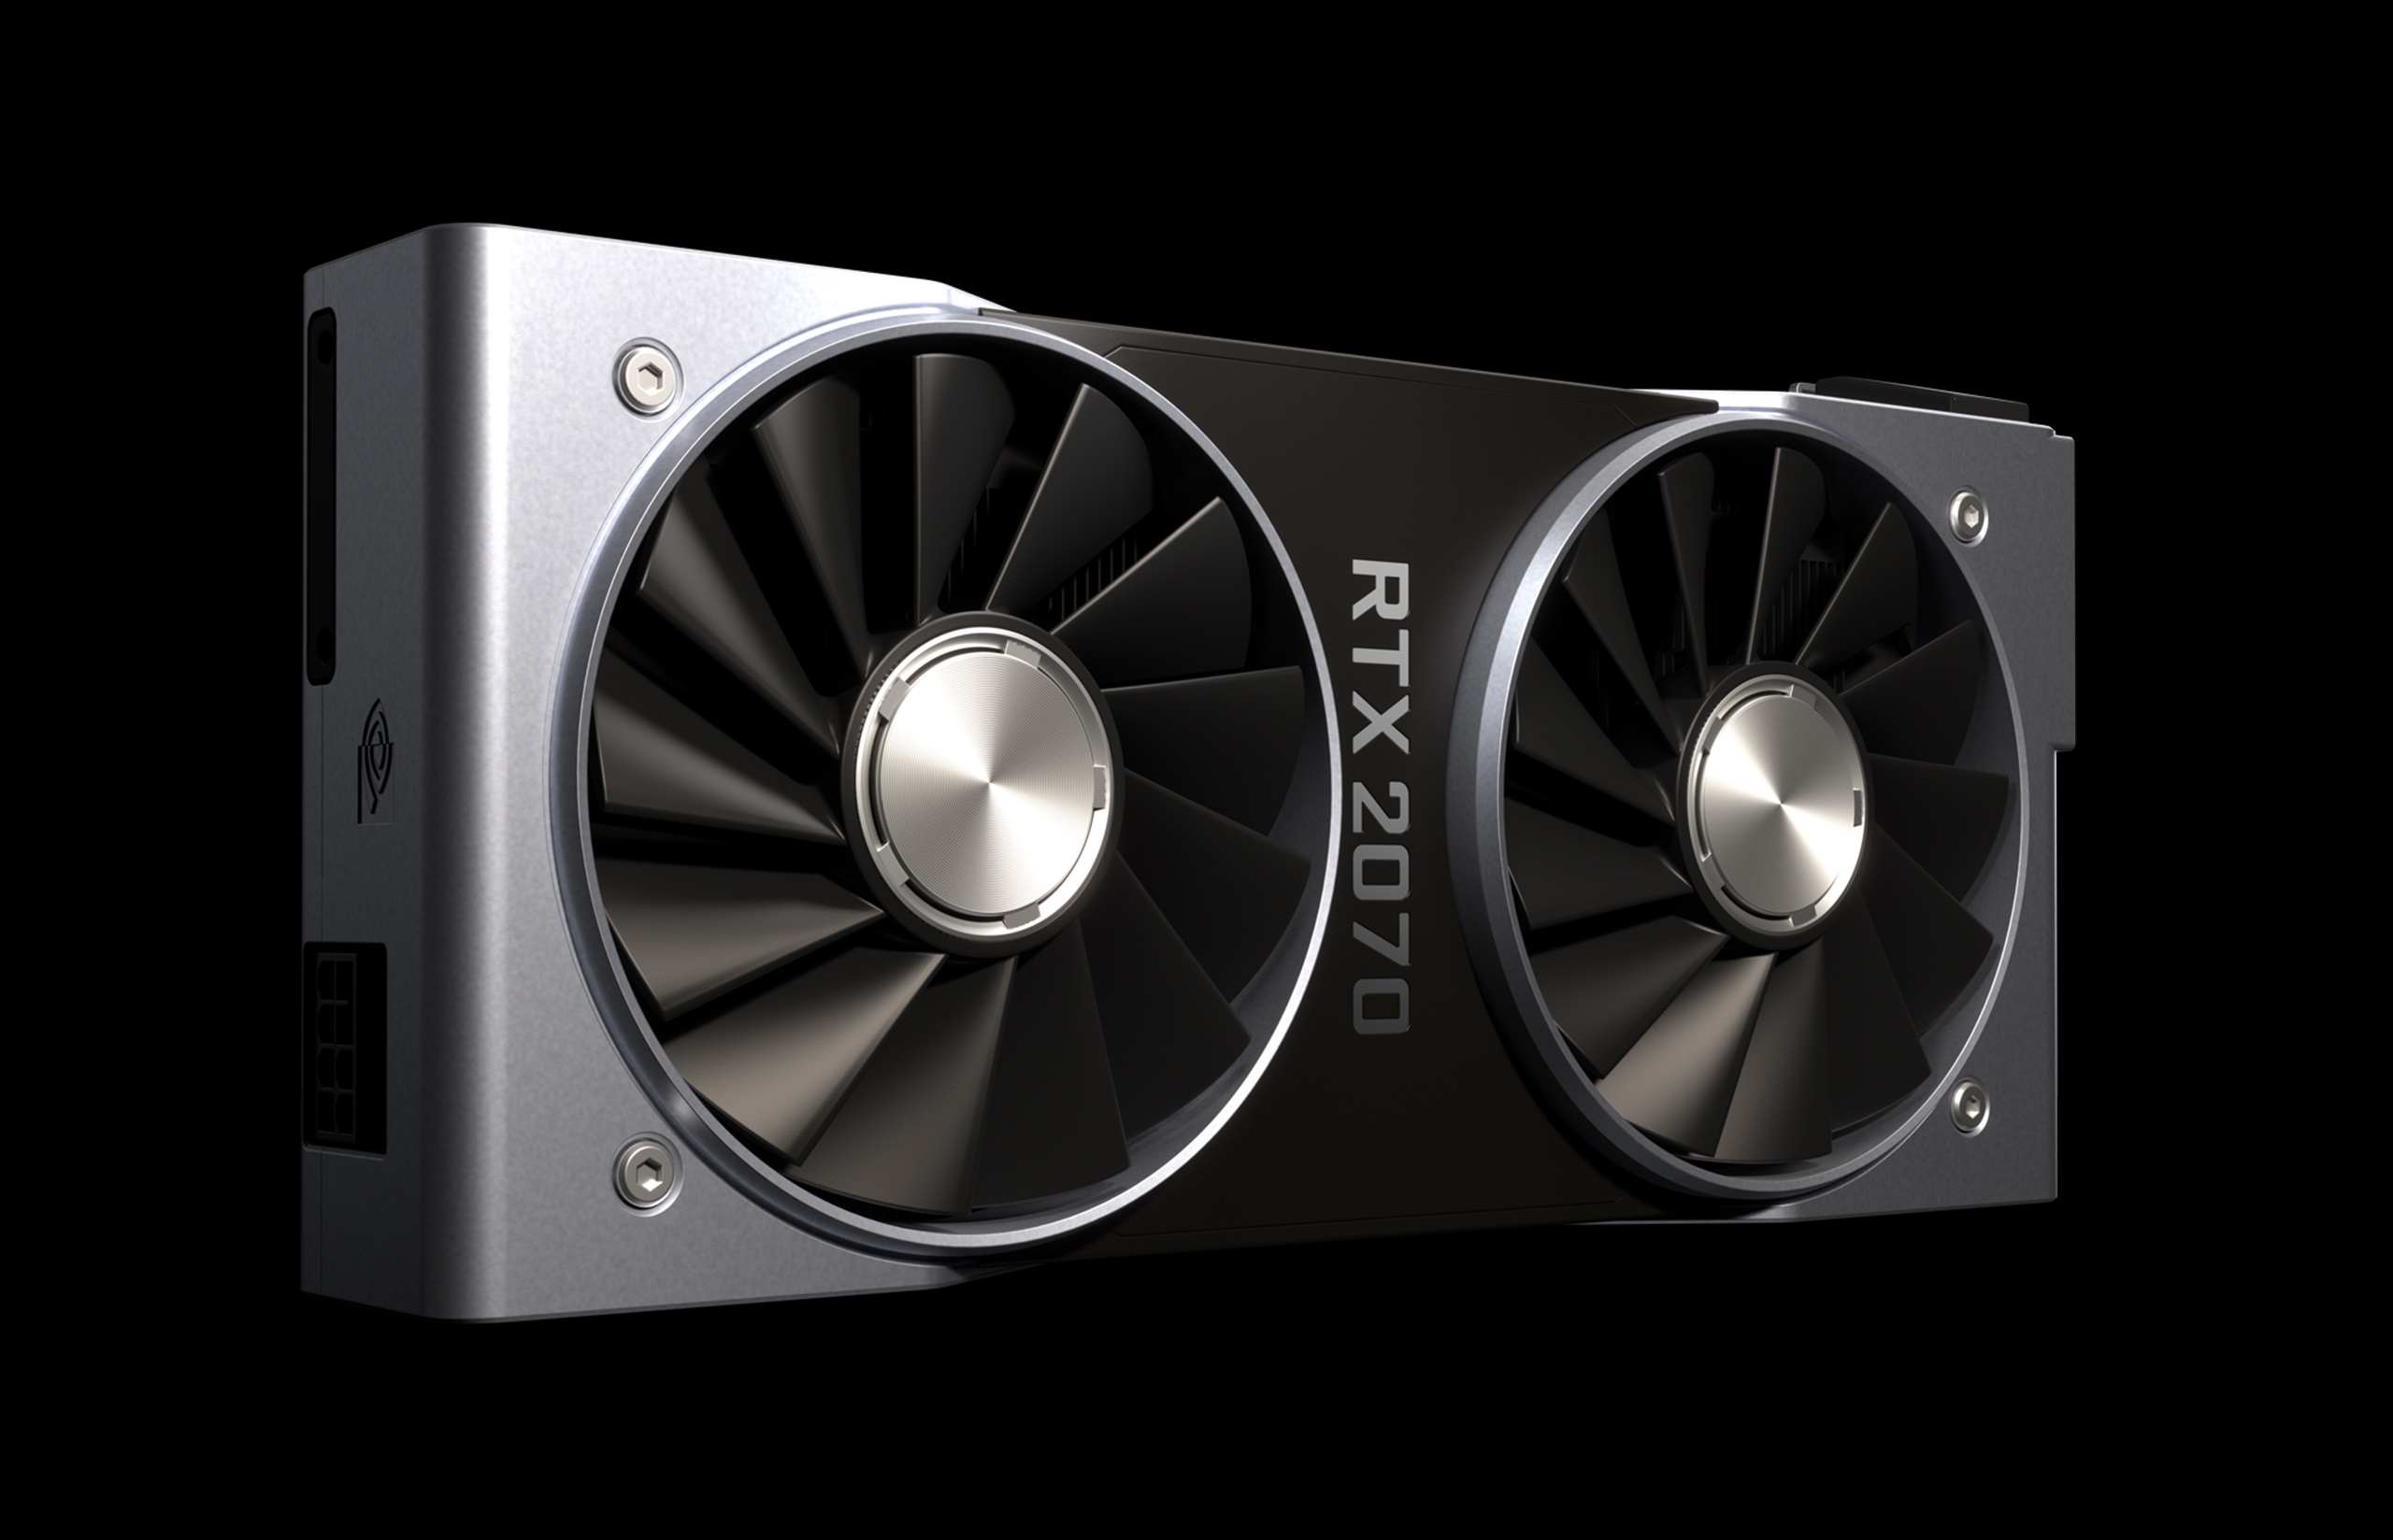 NVIDIA Scuttles AMD’s Plans With Release Of RX 5700 XT; RTX 2070 Super Remains The Video Card To Beat